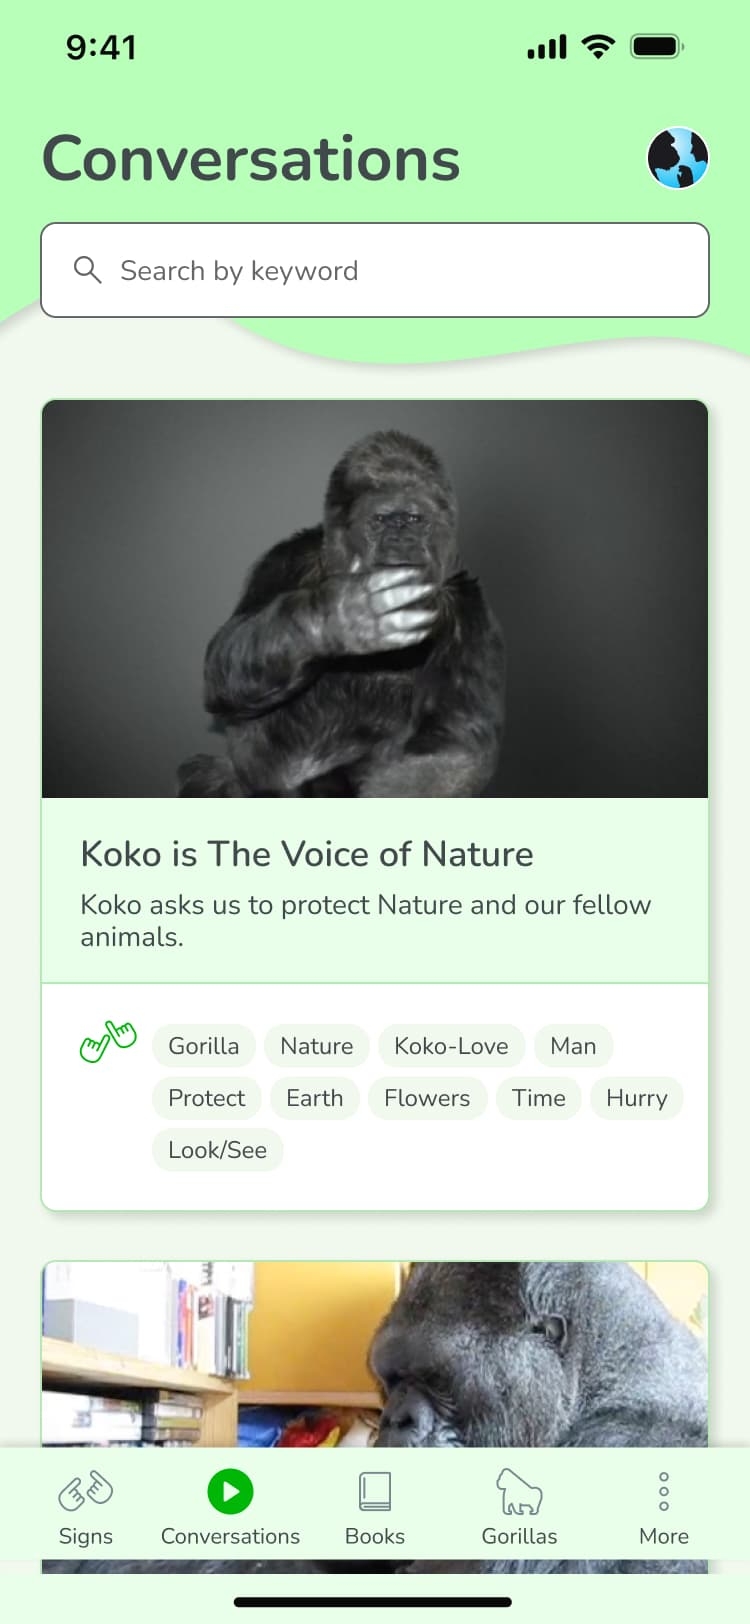 Koko signs app by ArcTouch screen displays a nature conversation app with an image of a gorilla and a search bar at the top.